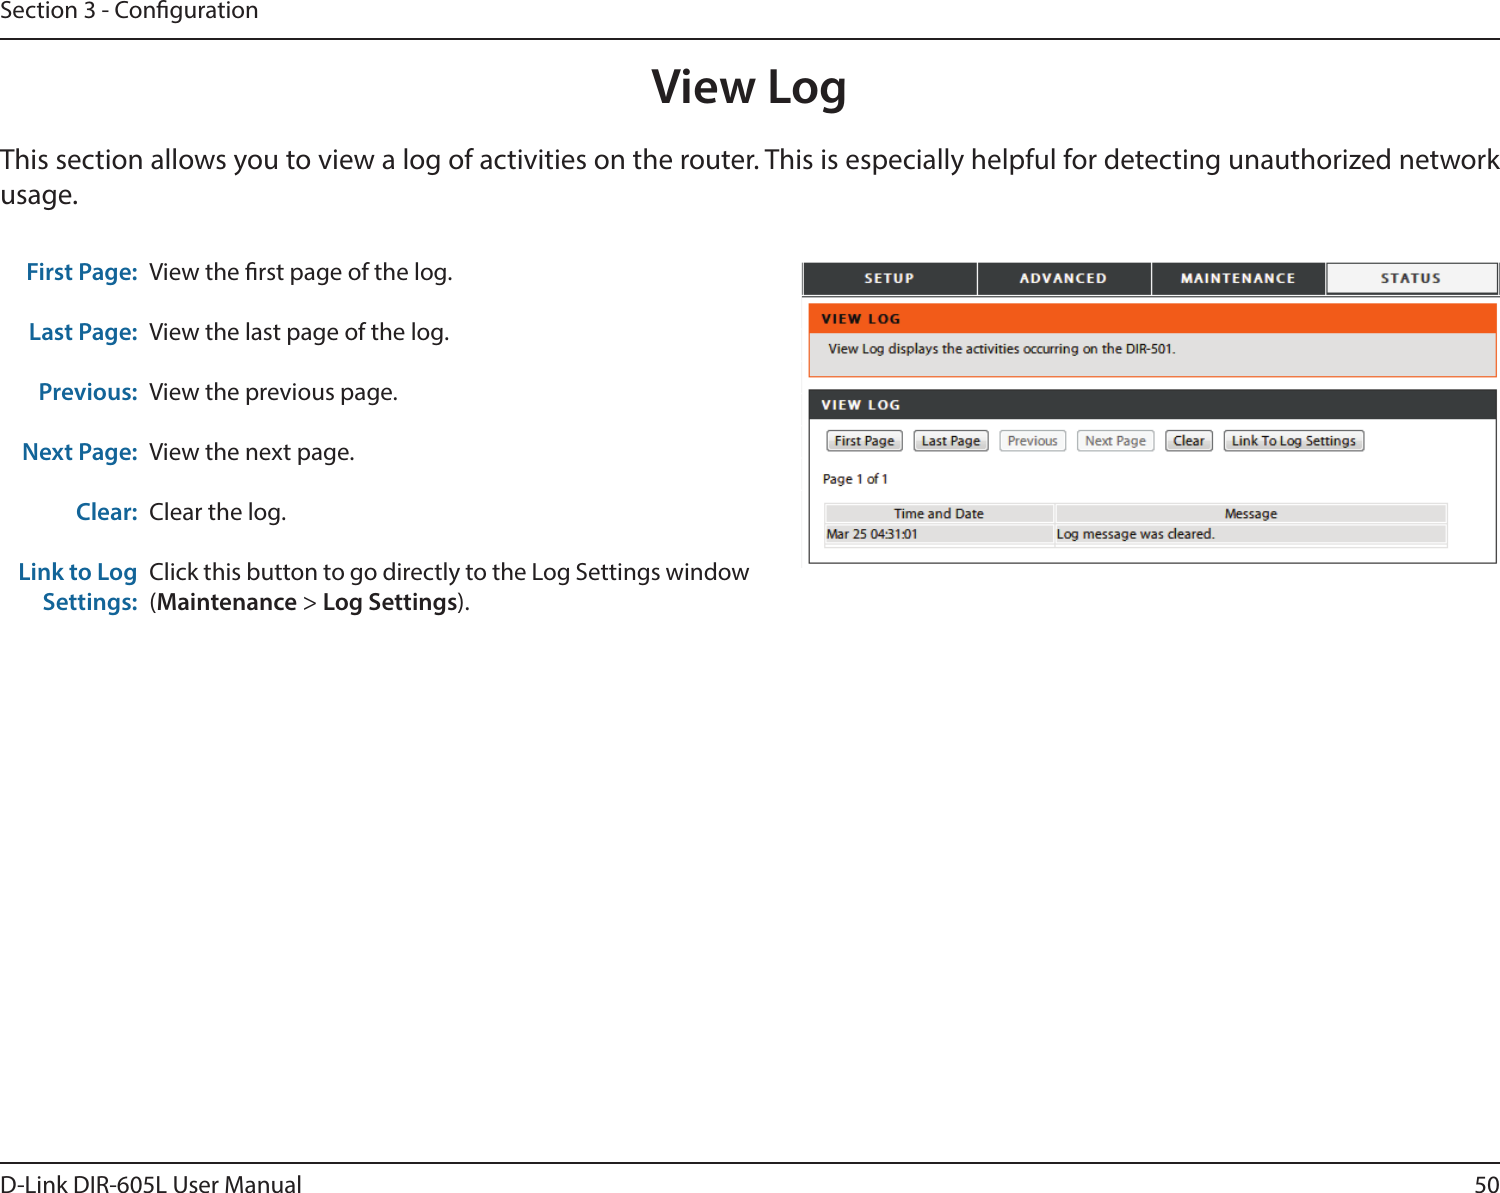 50D-Link DIR-605L User ManualSection 3 - CongurationView LogFirst Page:Last Page:Previous:Next Page:Clear:Link to Log Settings:View the rst page of the log.View the last page of the log.View the previous page.View the next page.Clear the log.Click this button to go directly to the Log Settings window (Maintenance &gt; Log Settings).This section allows you to view a log of activities on the router. This is especially helpful for detecting unauthorized network usage.